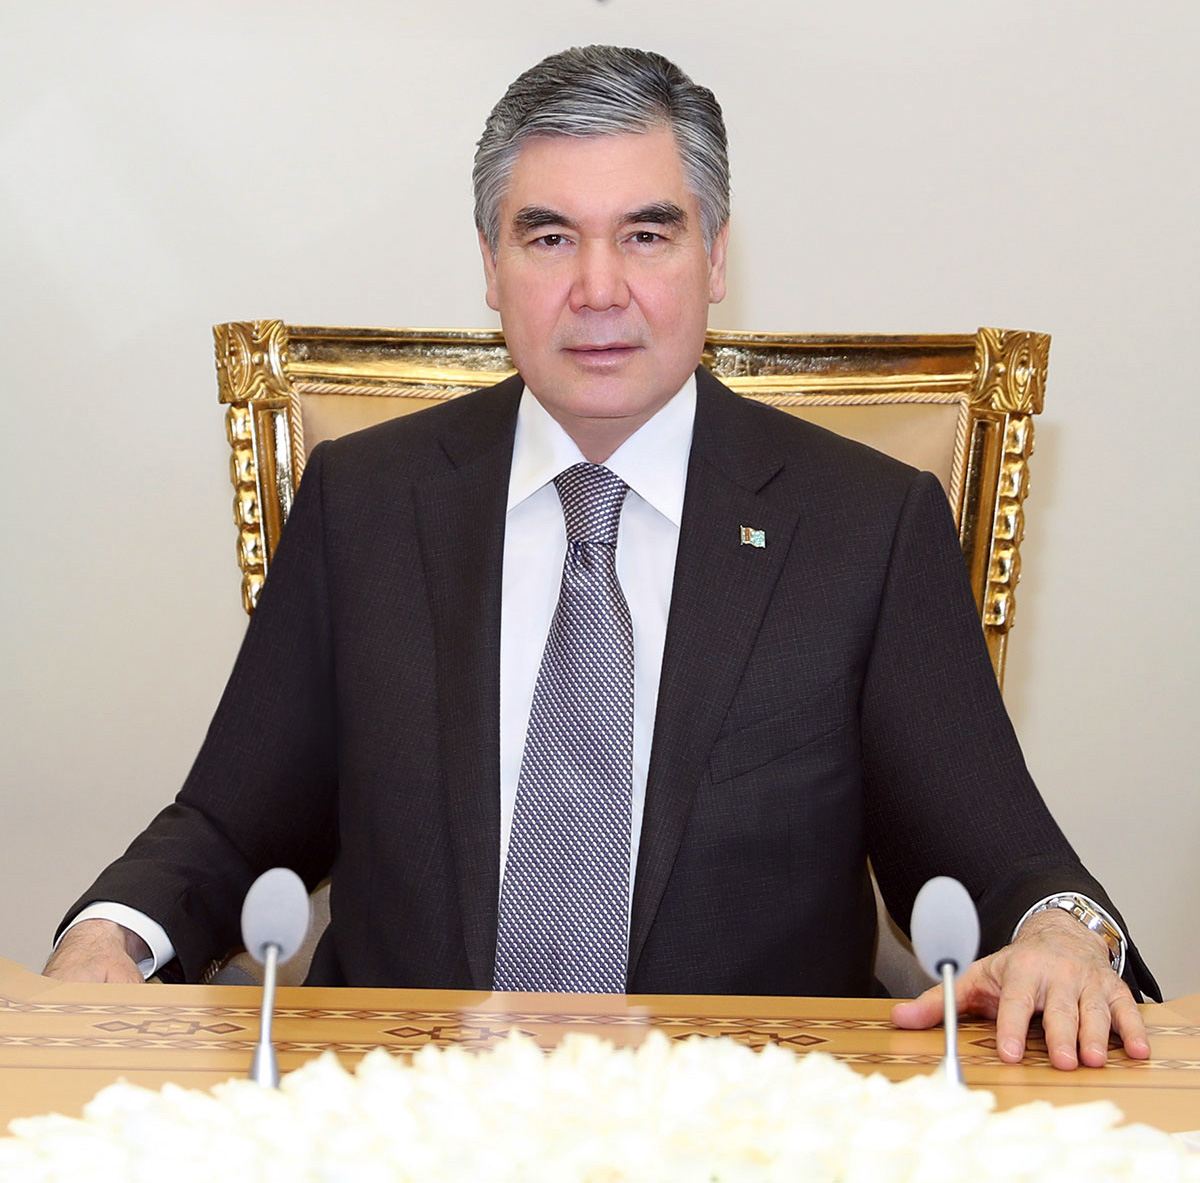 The President Of Turkmenistan Held The First Meeting Of The